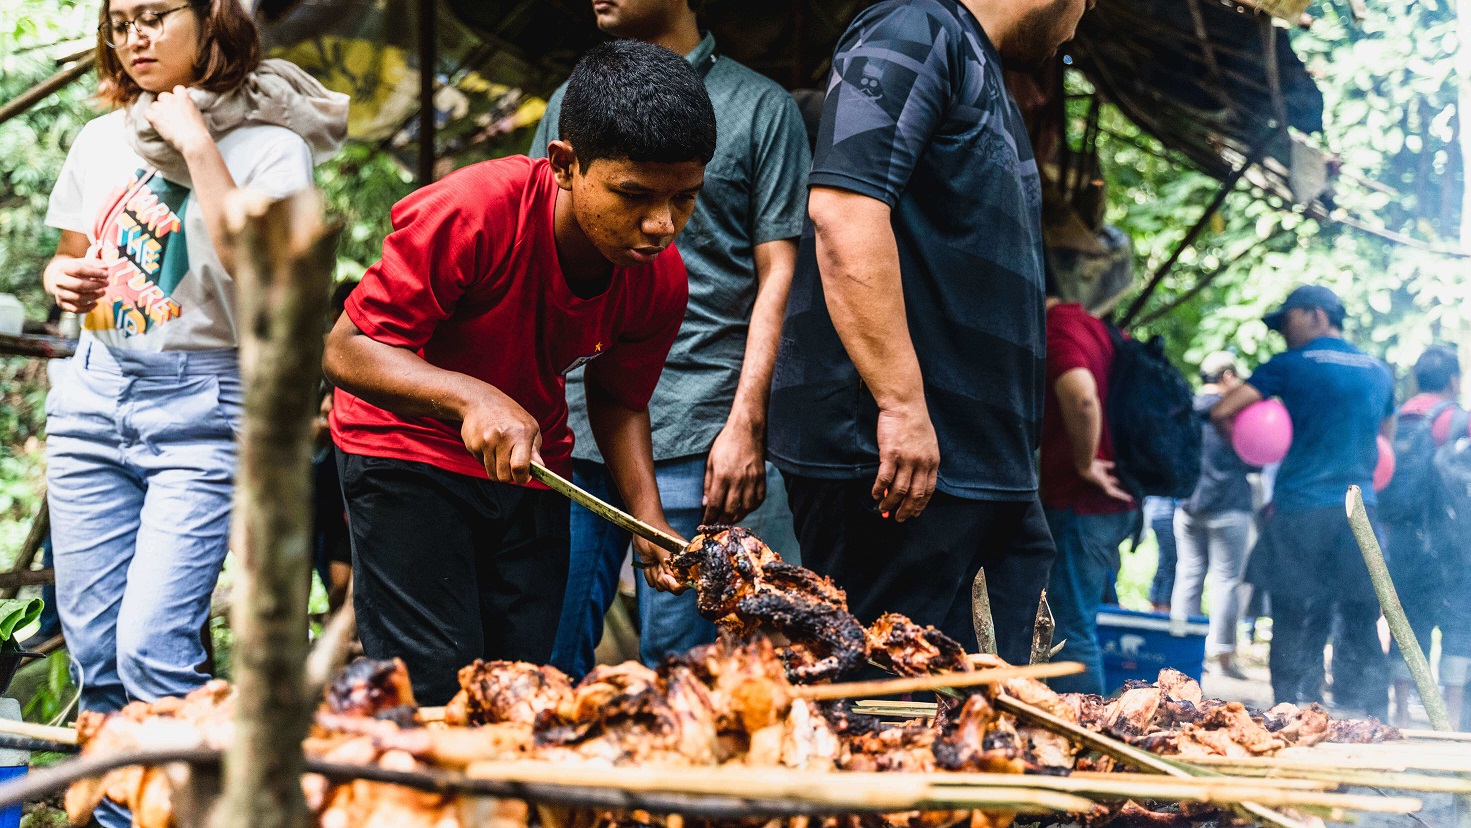 During the tours, visitors go on guided walks with their Orang Asli hosts, followed by a meal of traditional fare, and activities like craft-making or blow-pipe hunting. Photo courtesy of Native.